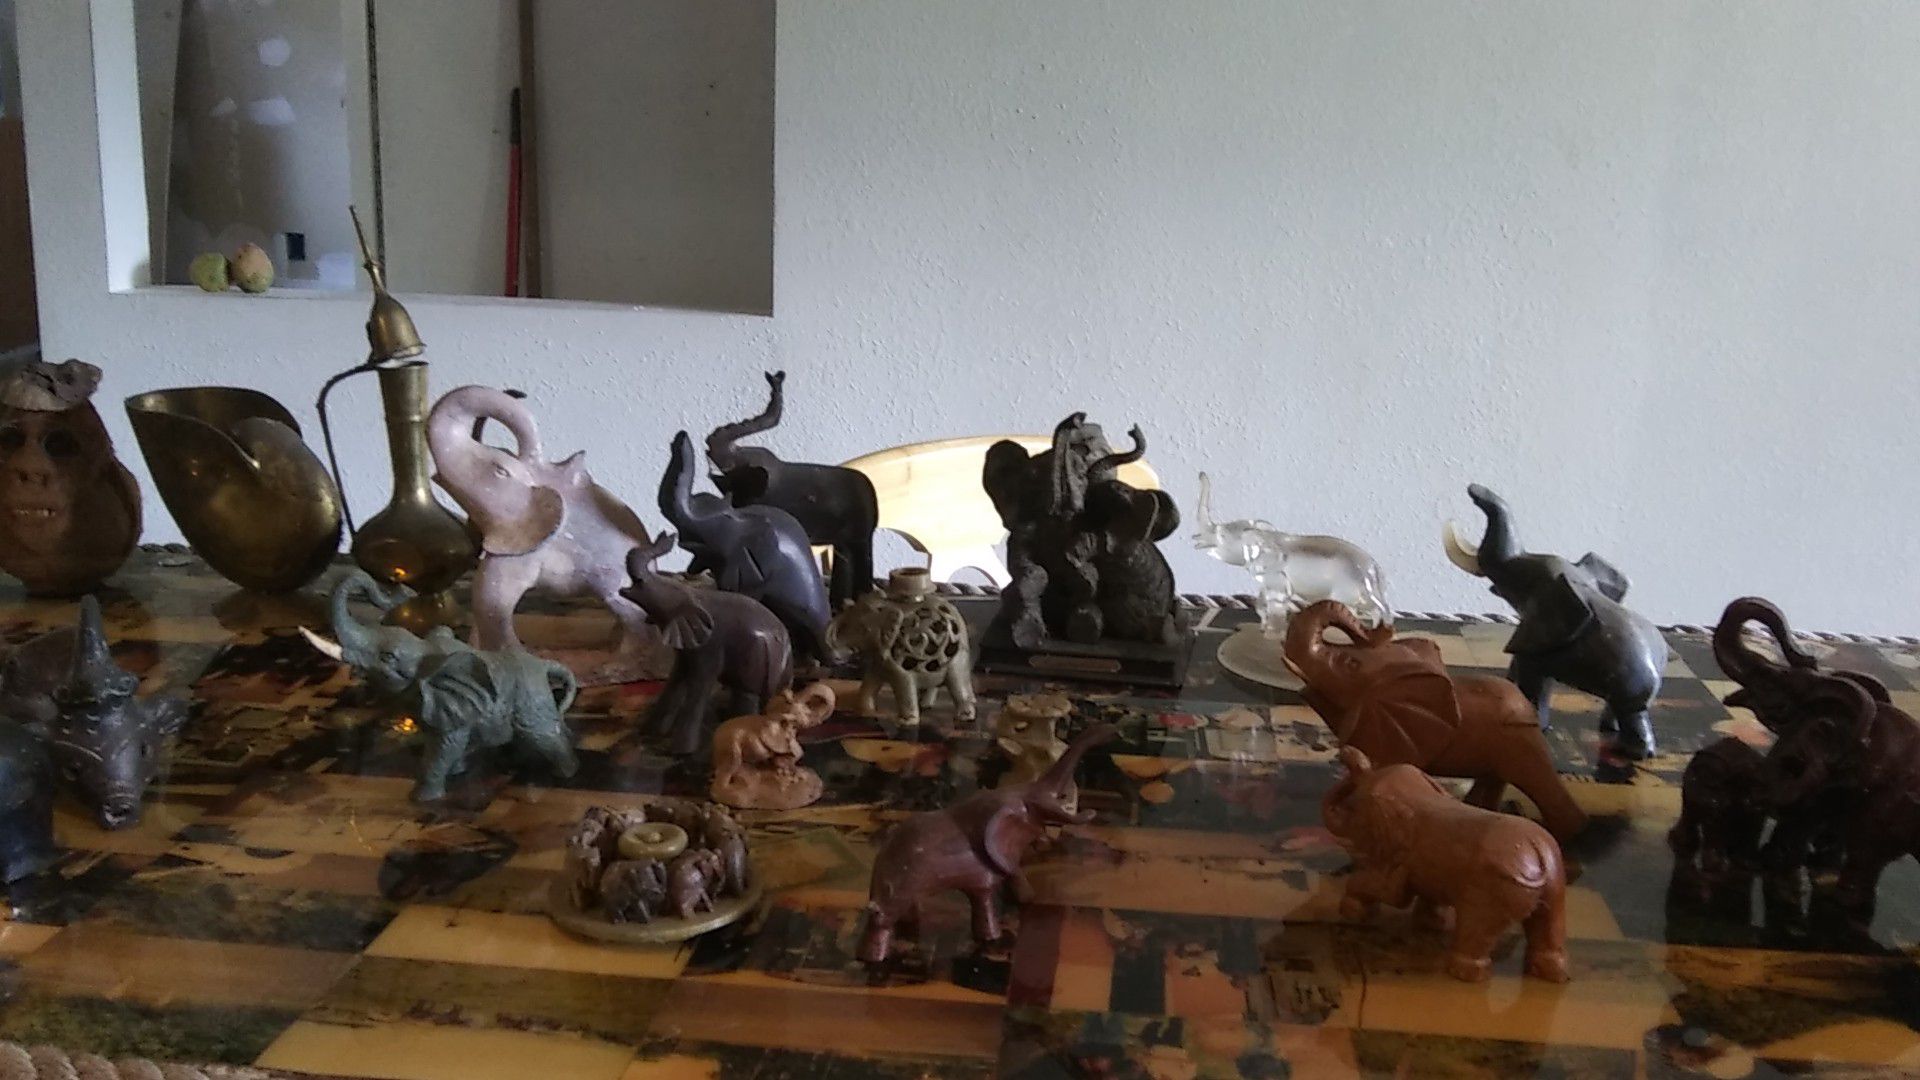 Elephant collectables